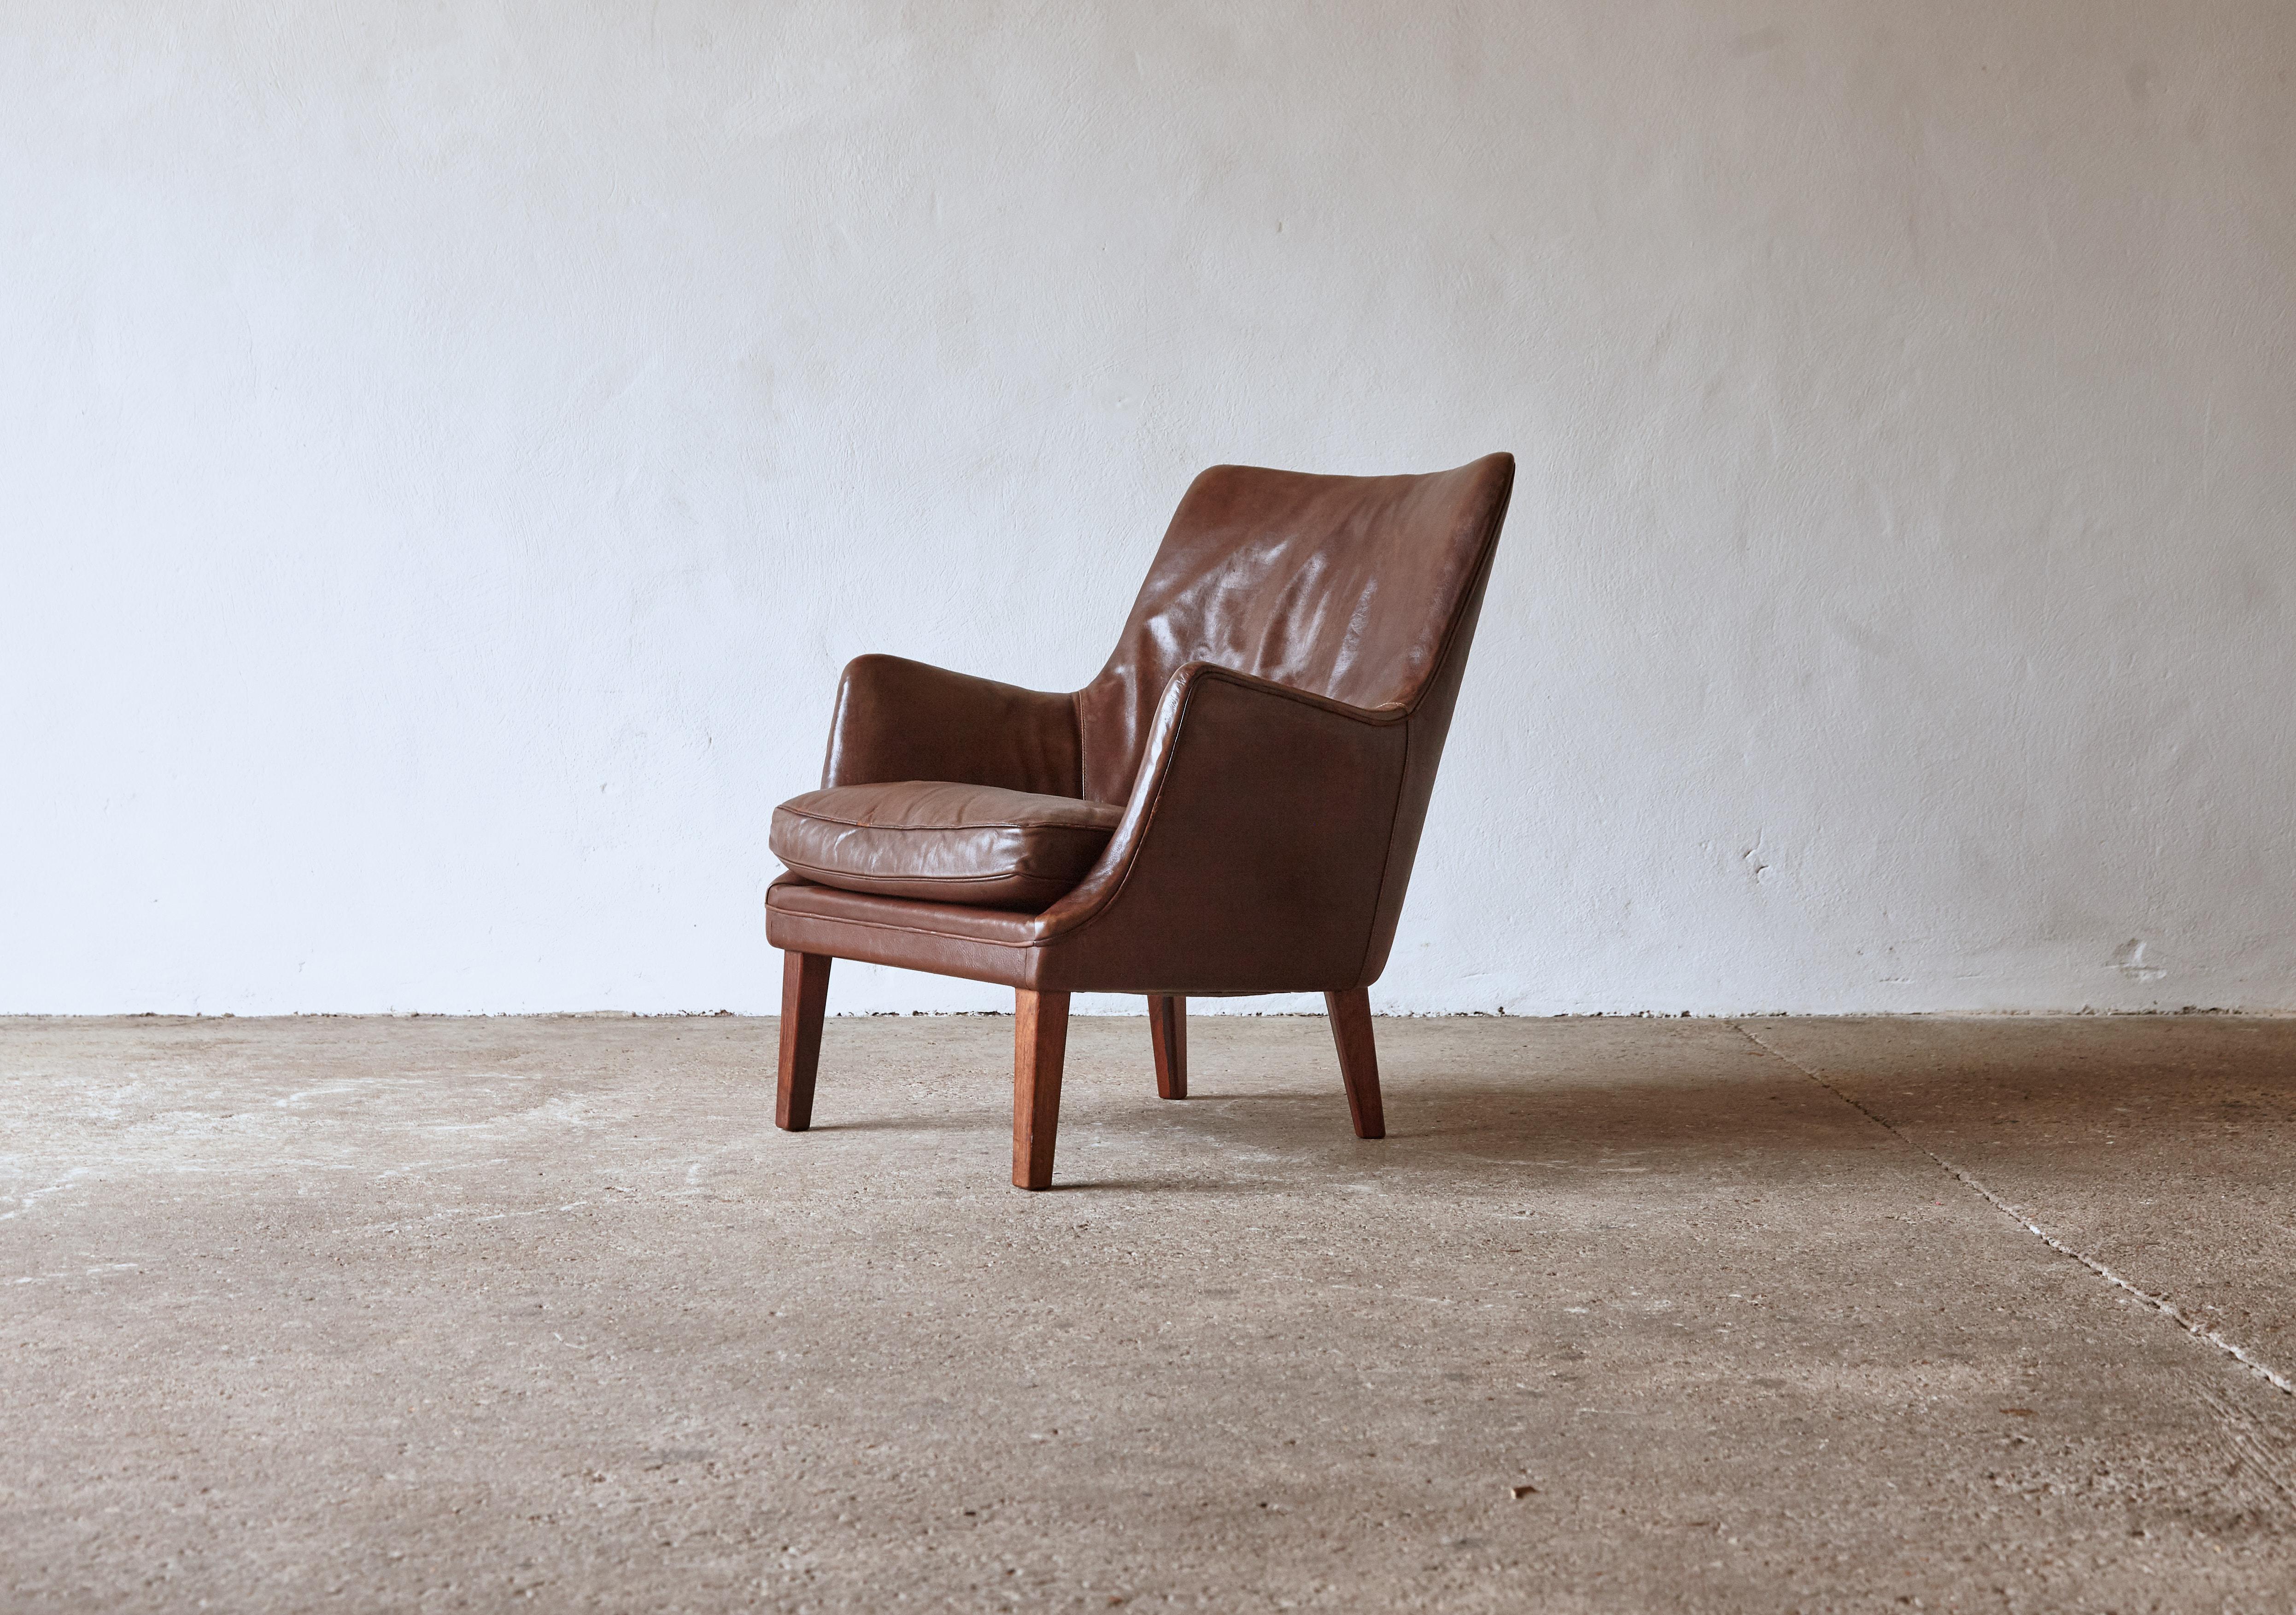 Arne Vodder armchair in original brown patinated leather with rosewood legs, produced by Ivan Schlechter, Denmark, 1950s. In good original condition with a nice tone and patina. Minor wear and losses to leather piping. Fast shipping worldwide.


